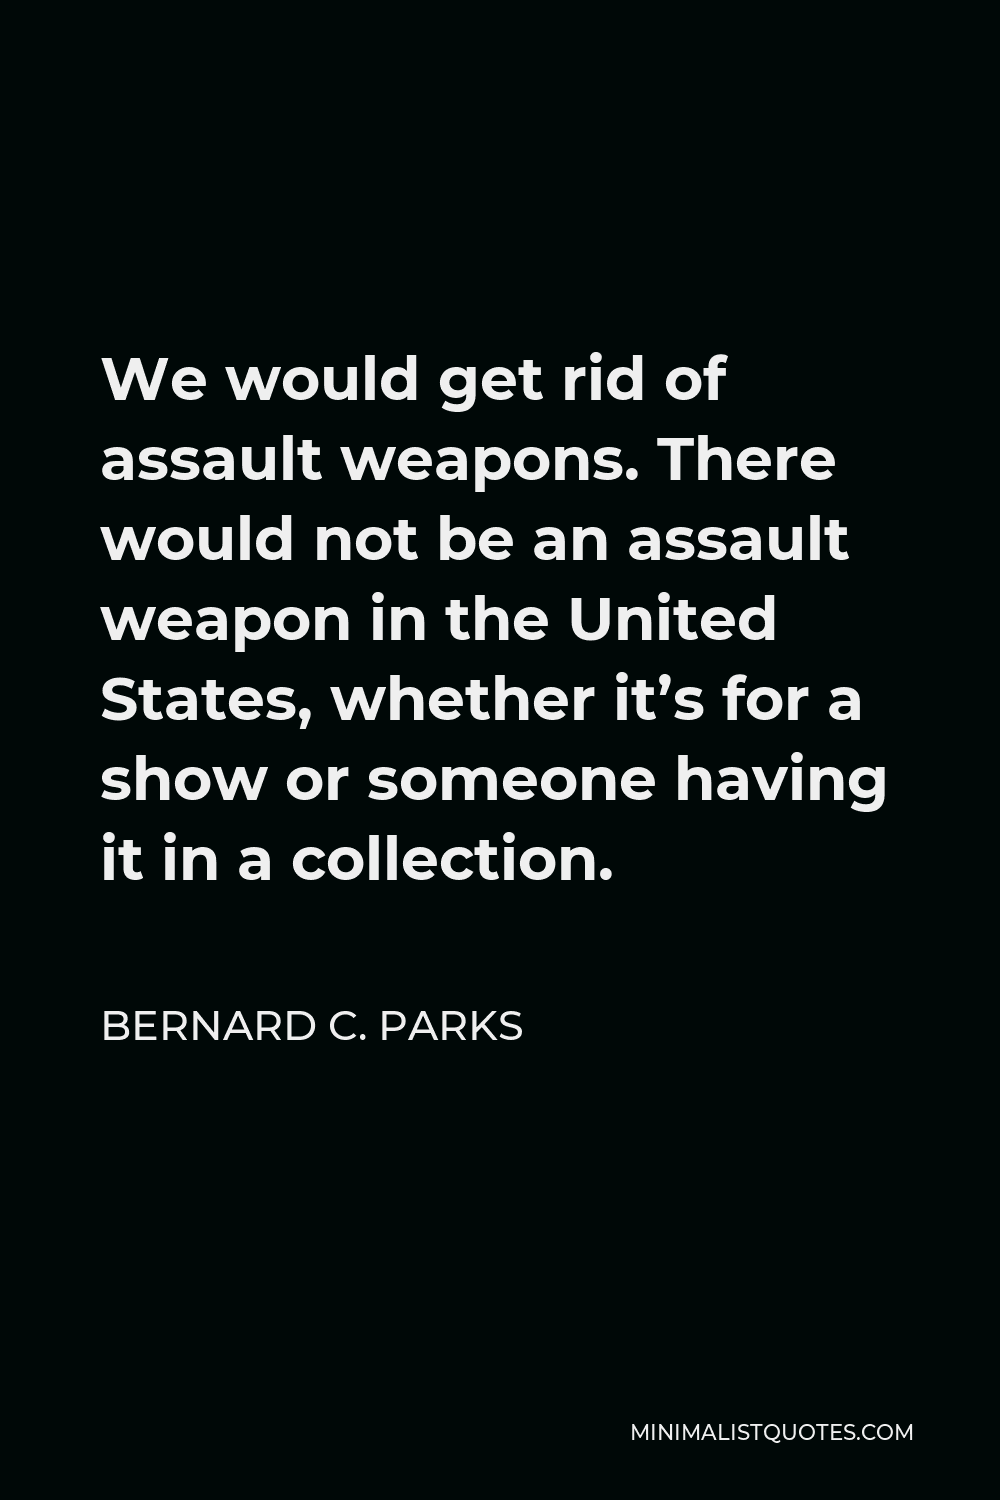 Bernard C. Parks Quote - We would get rid of assault weapons. There would not be an assault weapon in the United States, whether it’s for a show or someone having it in a collection.